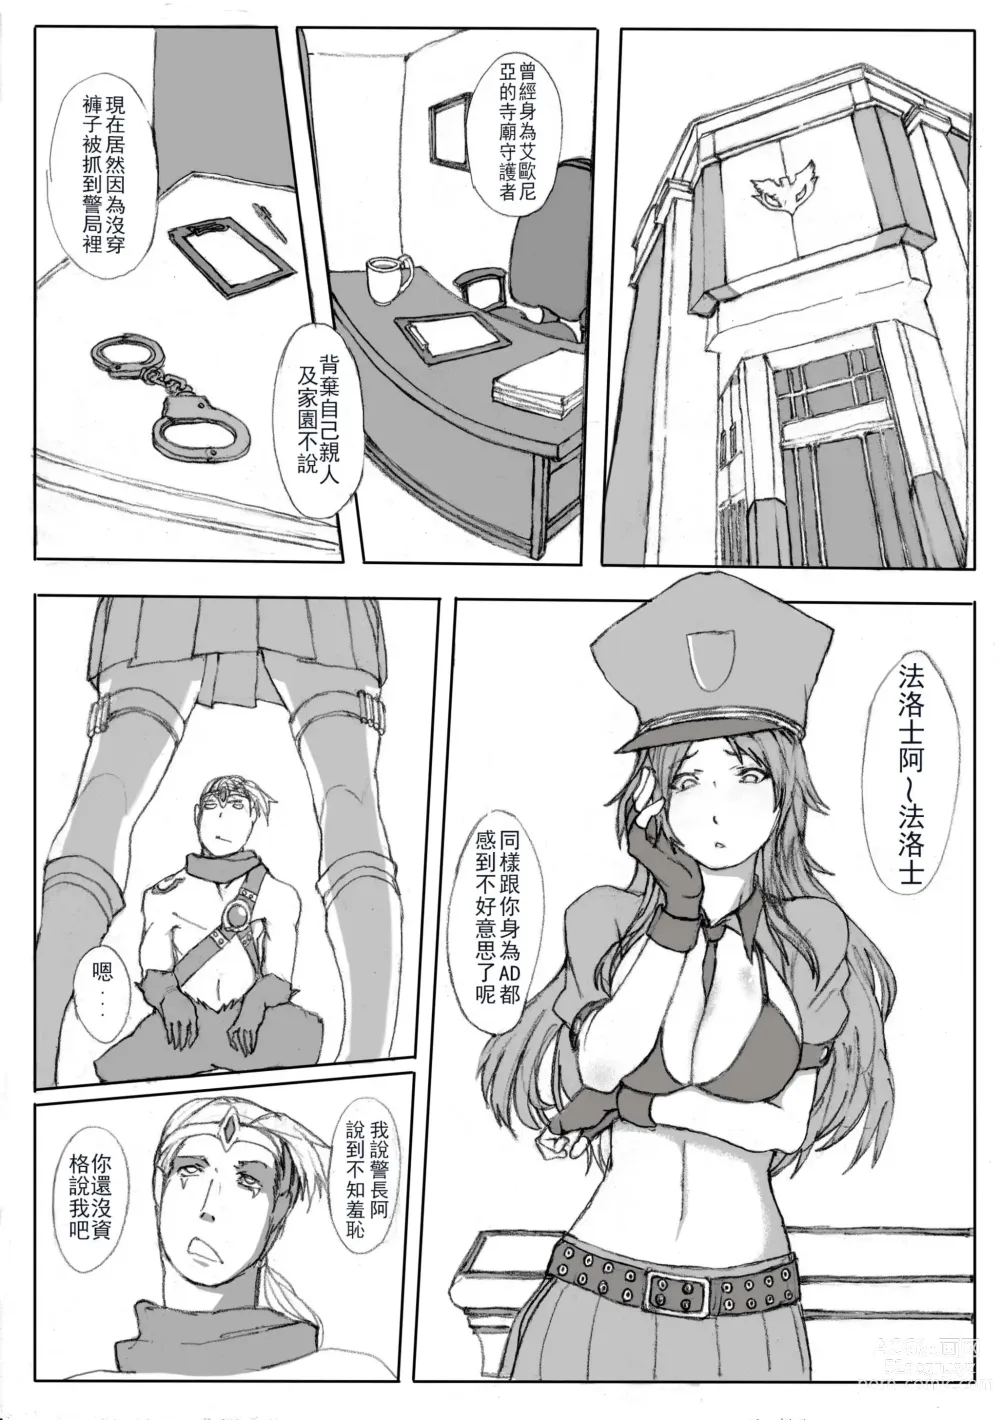 Page 2 of doujinshi 凱特琳壞壞 (League of Legends) [無修正]中文